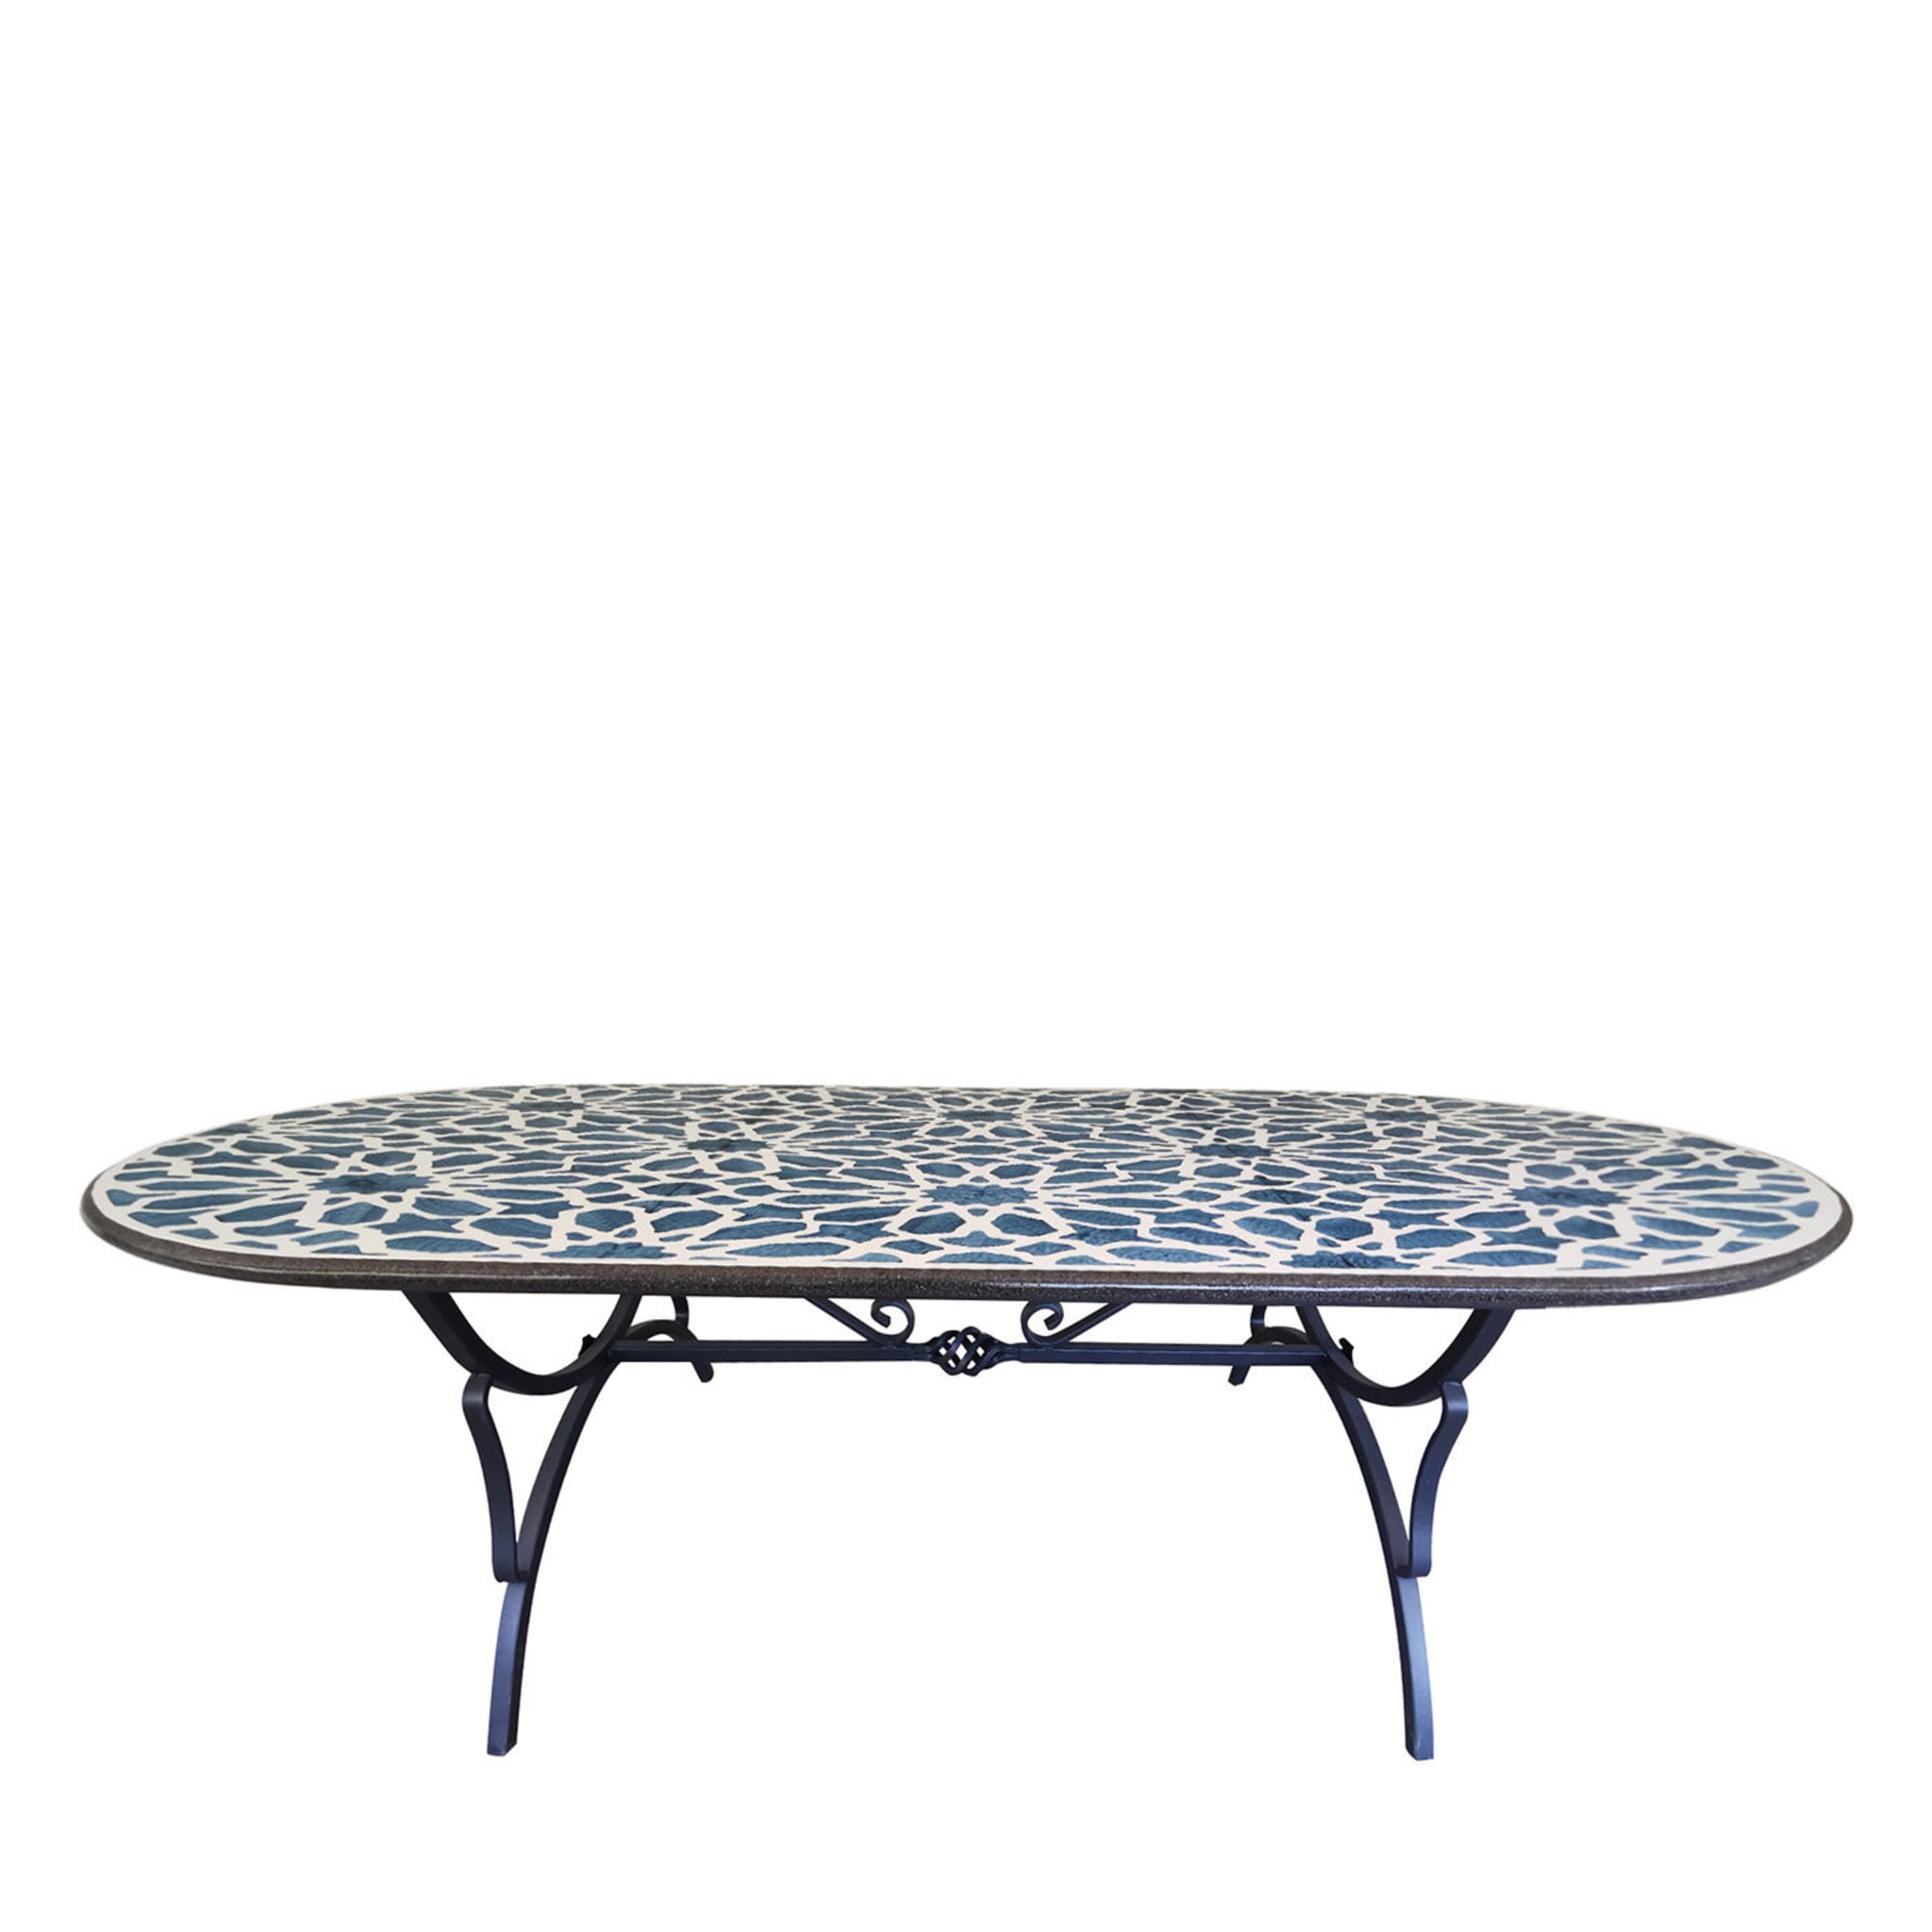 Grinda Oval Table - Main view